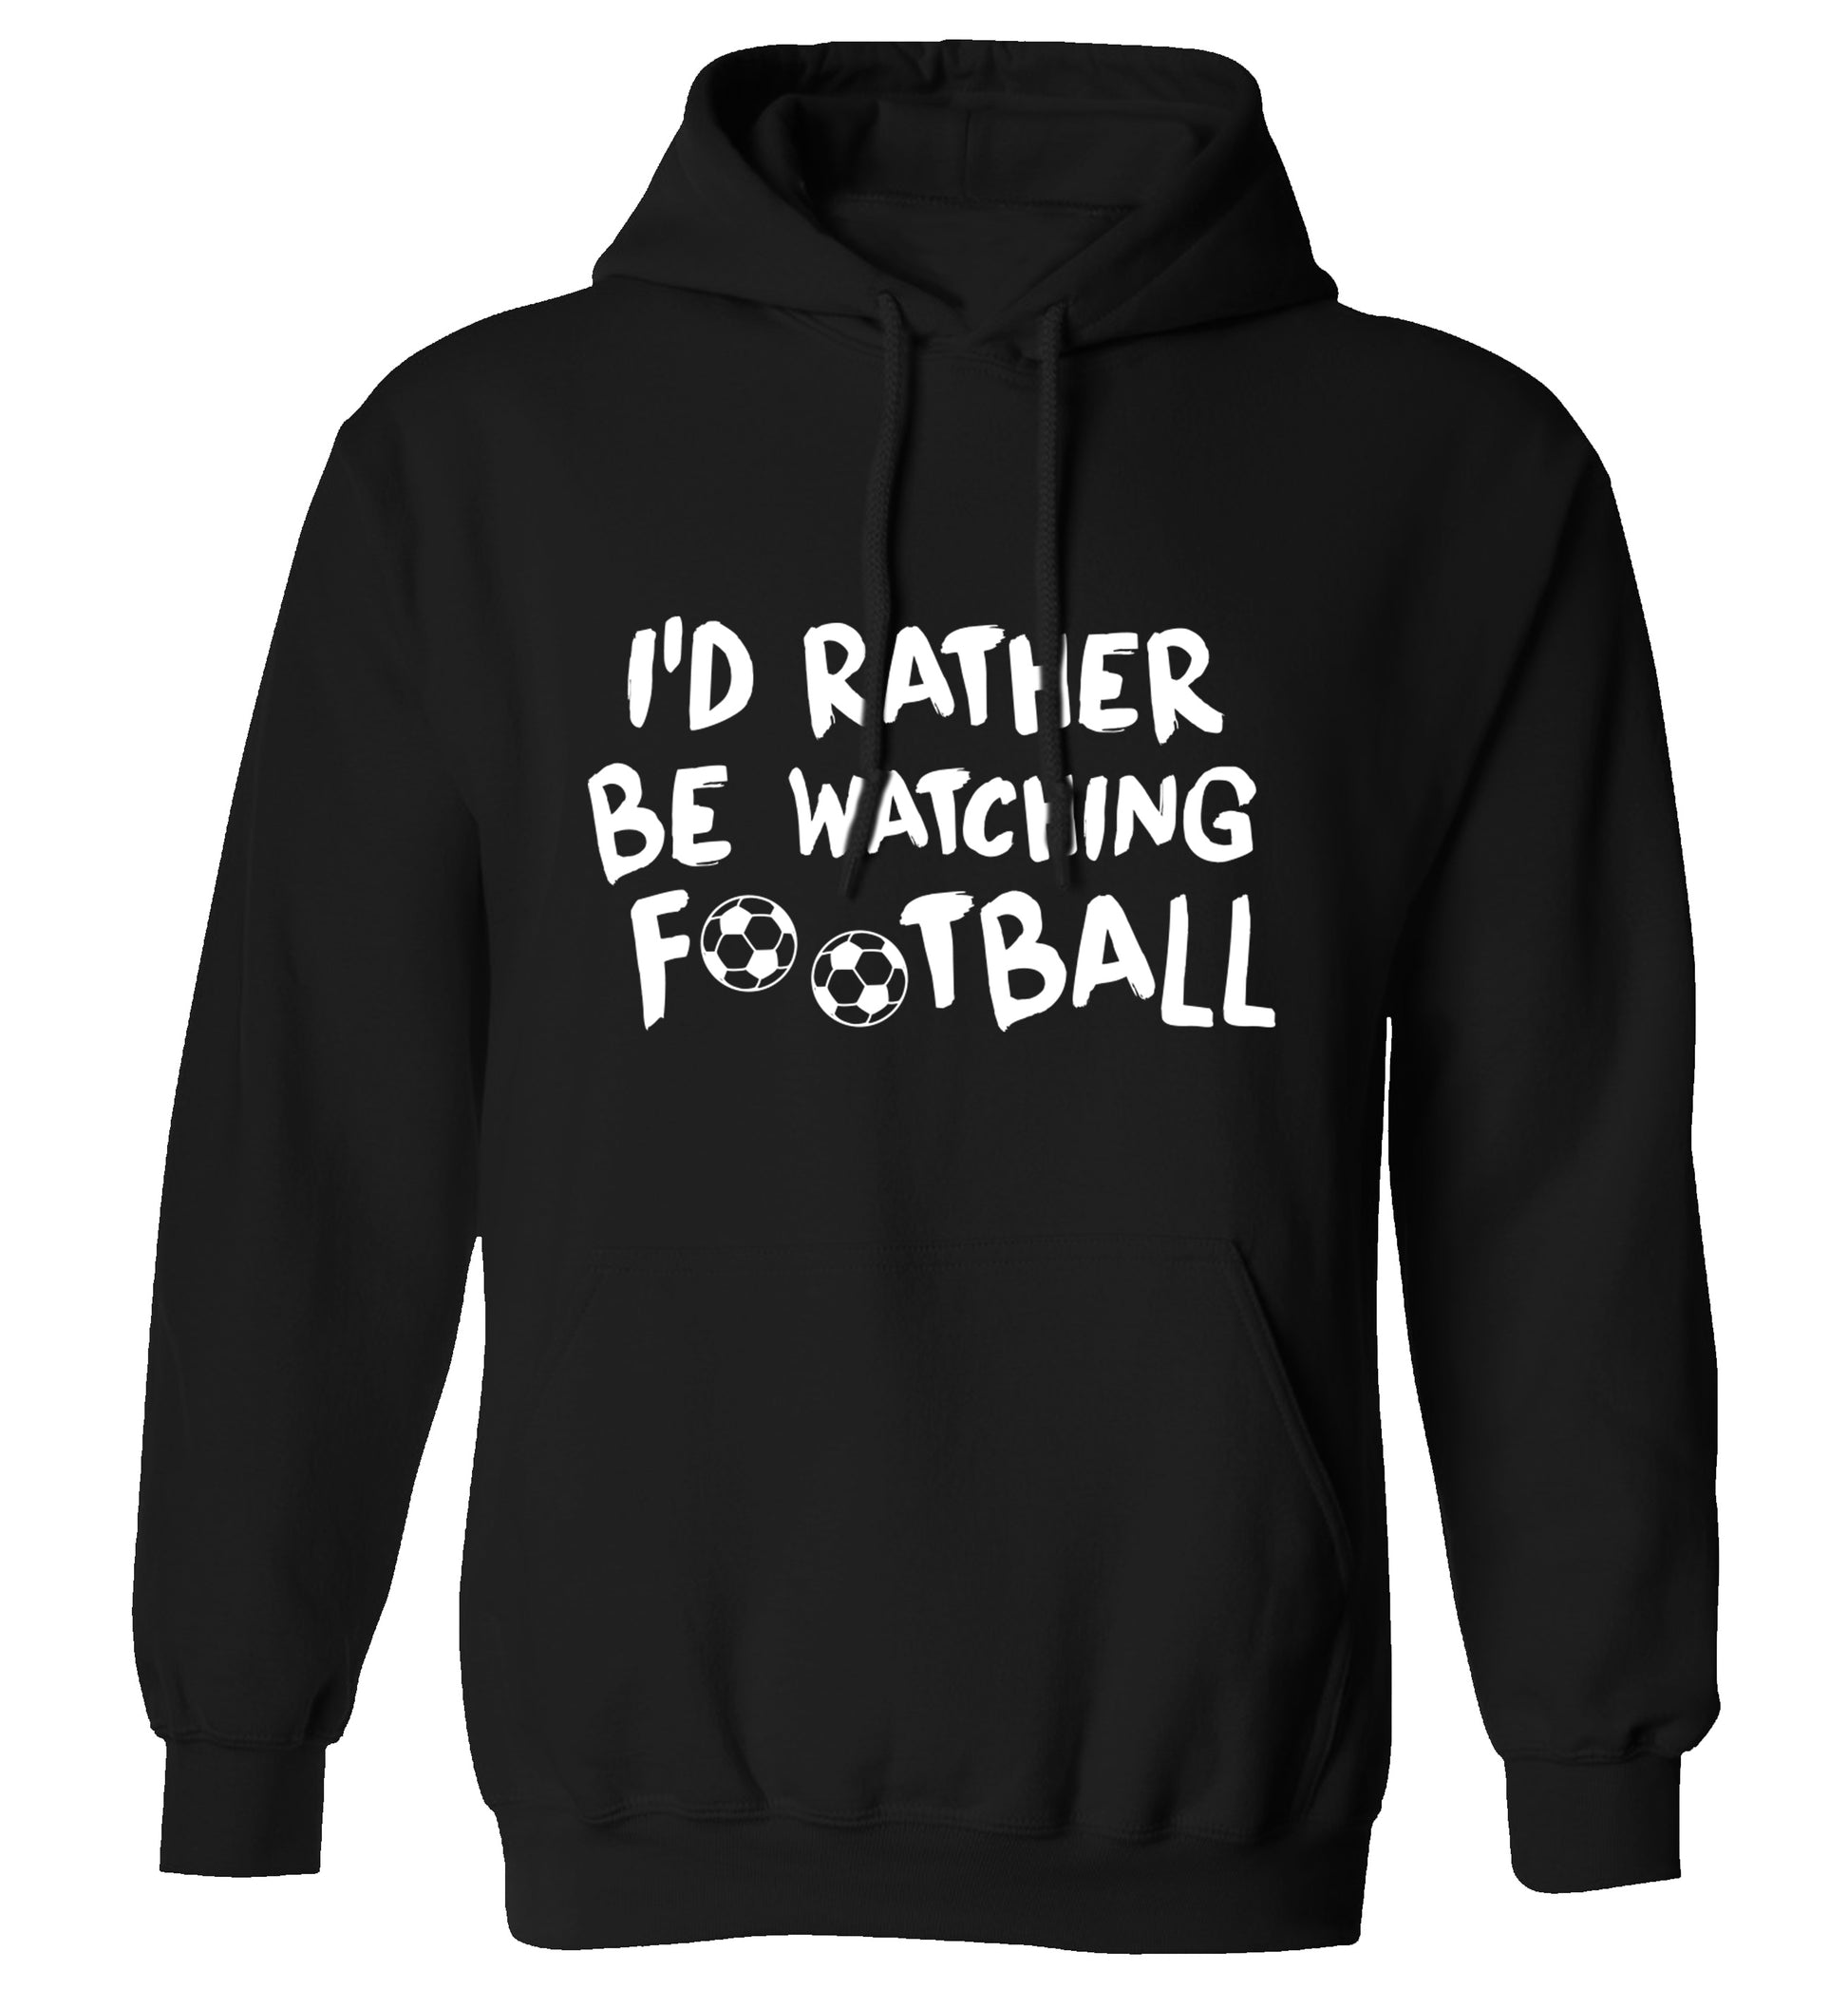 I'd rather be watching football adults unisexblack hoodie 2XL